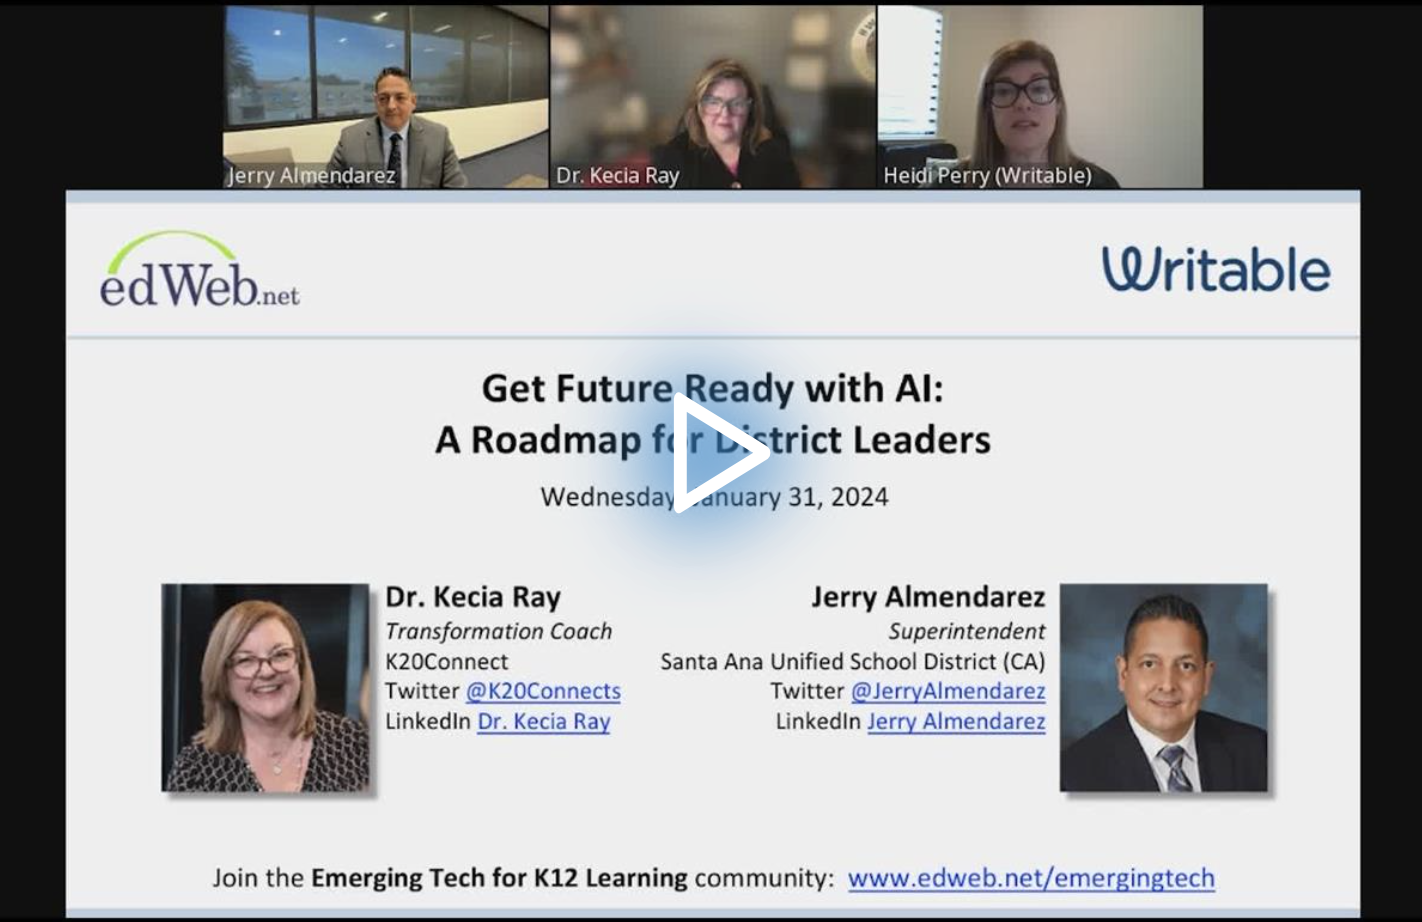 Get Future Ready with AI: A Roadmap for District Leaders edLeader Panel recording image